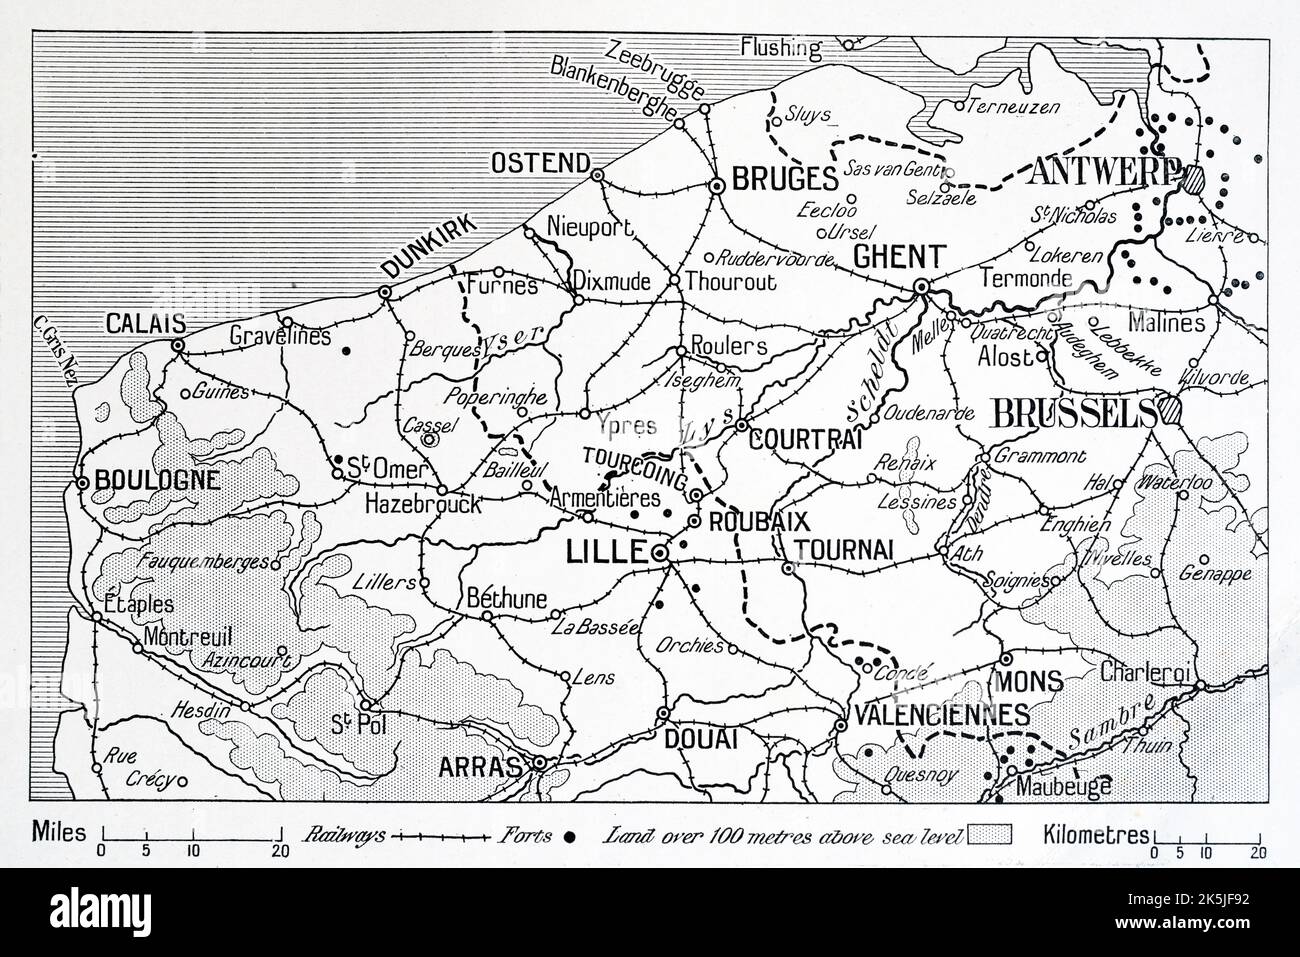 vintage map of world war1operations in france Stock Photo